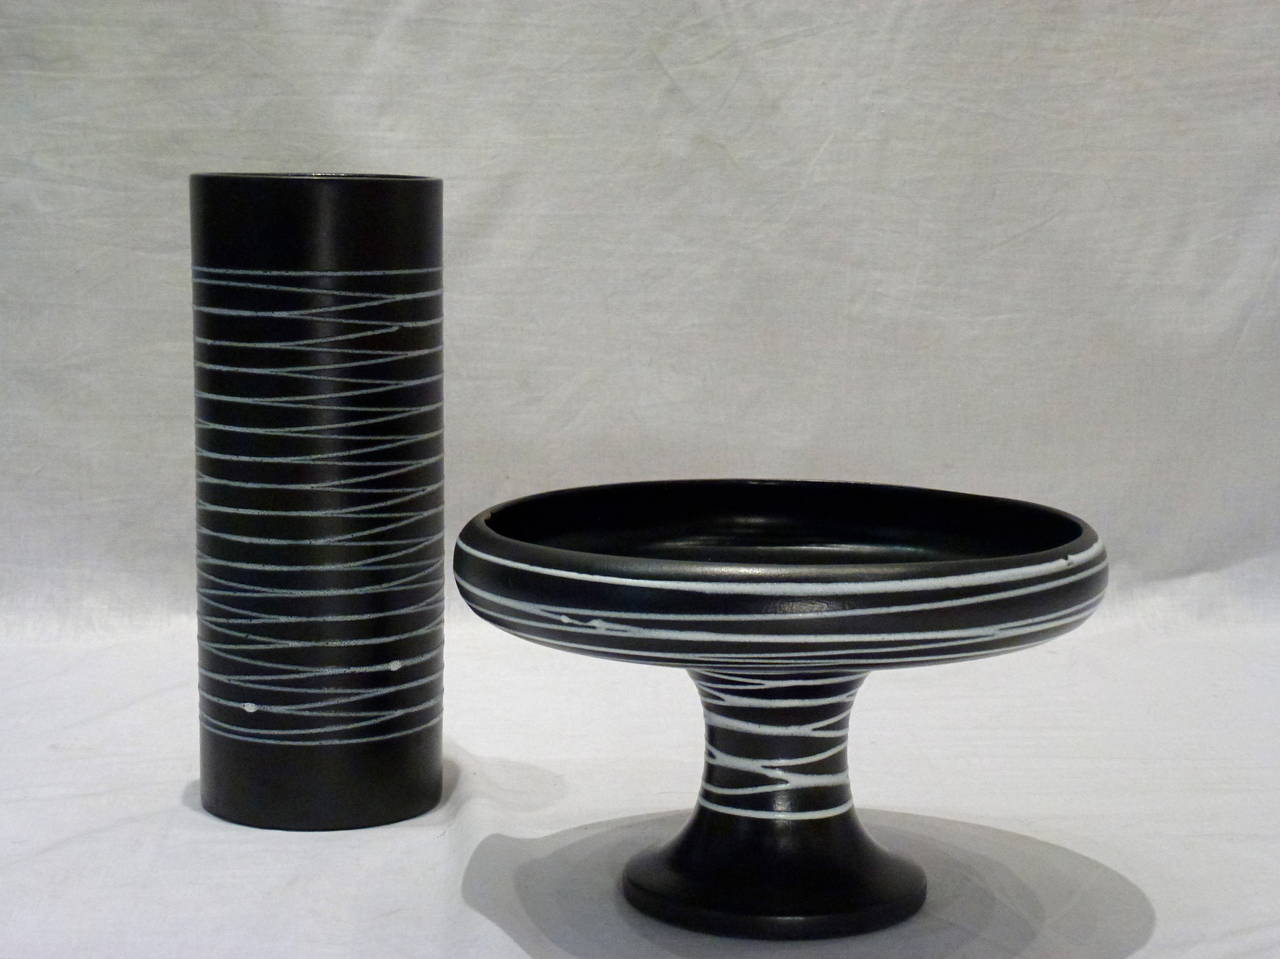 Beautiful vintage set of two black pottery pieces with white crisscross line detailing by Royal Haegar set consists of a cylinder vase and compote.

Vase: 4.75